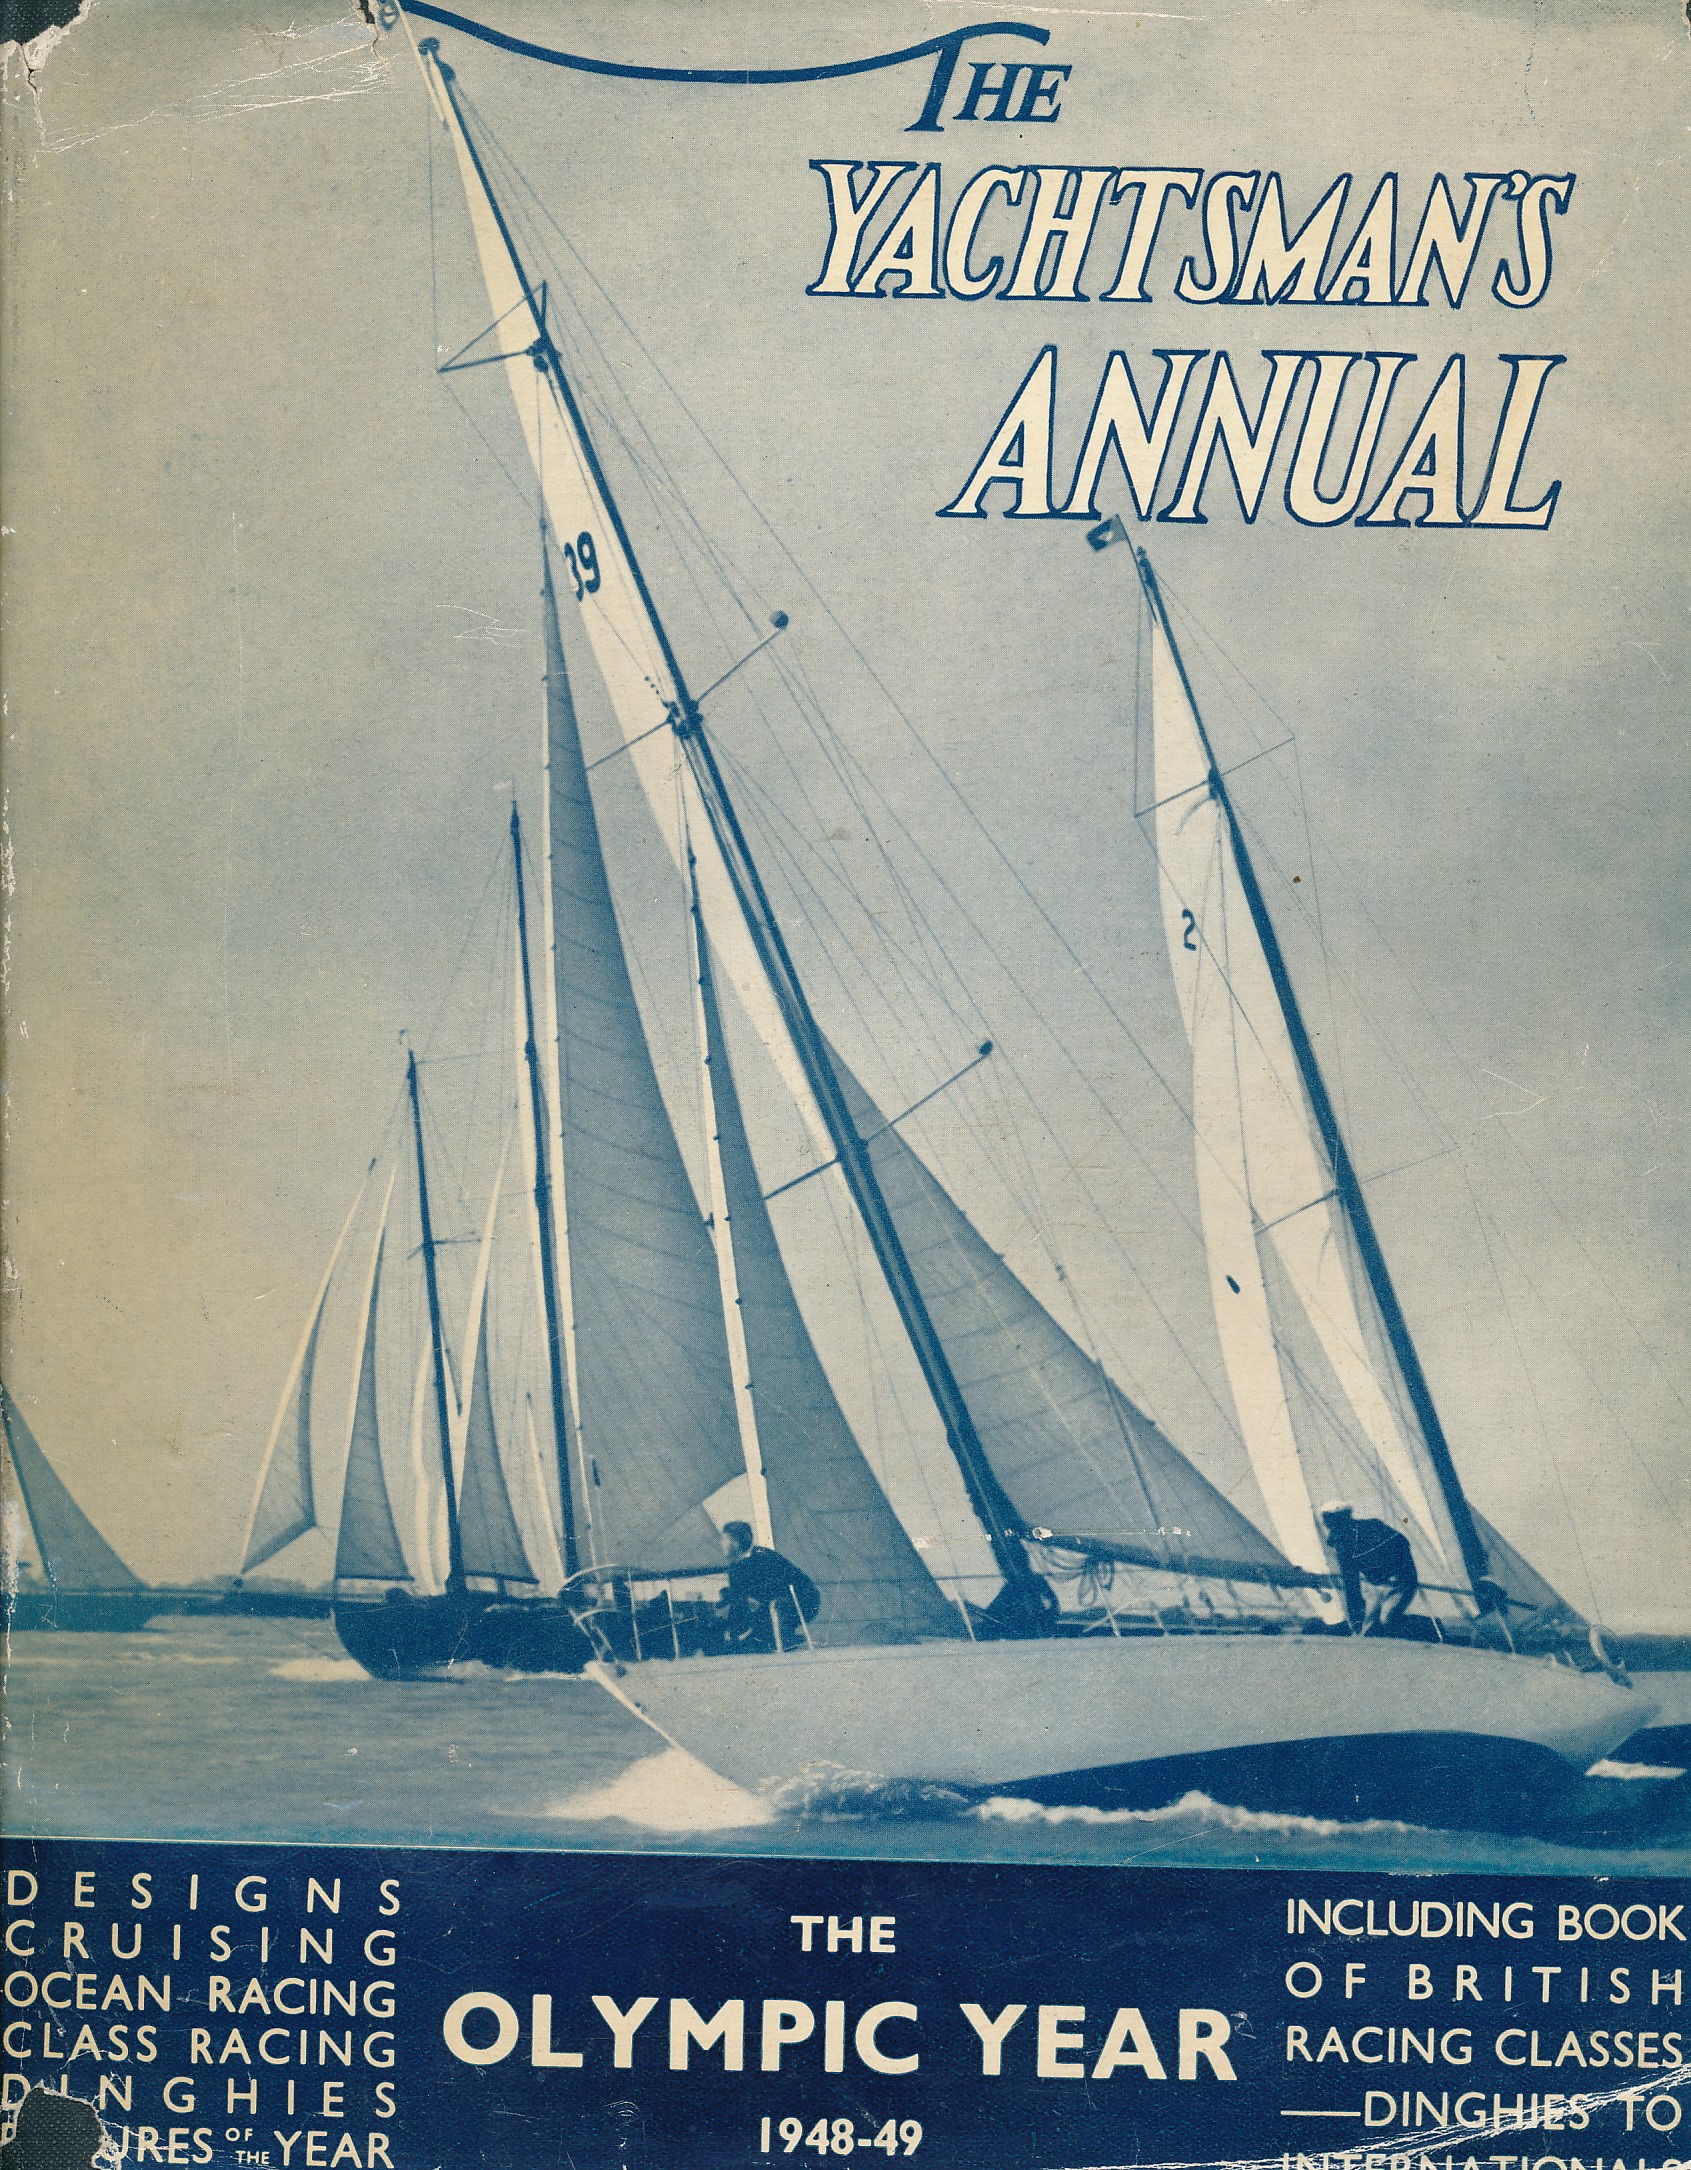 The Yachtsman's Annual 1948-49